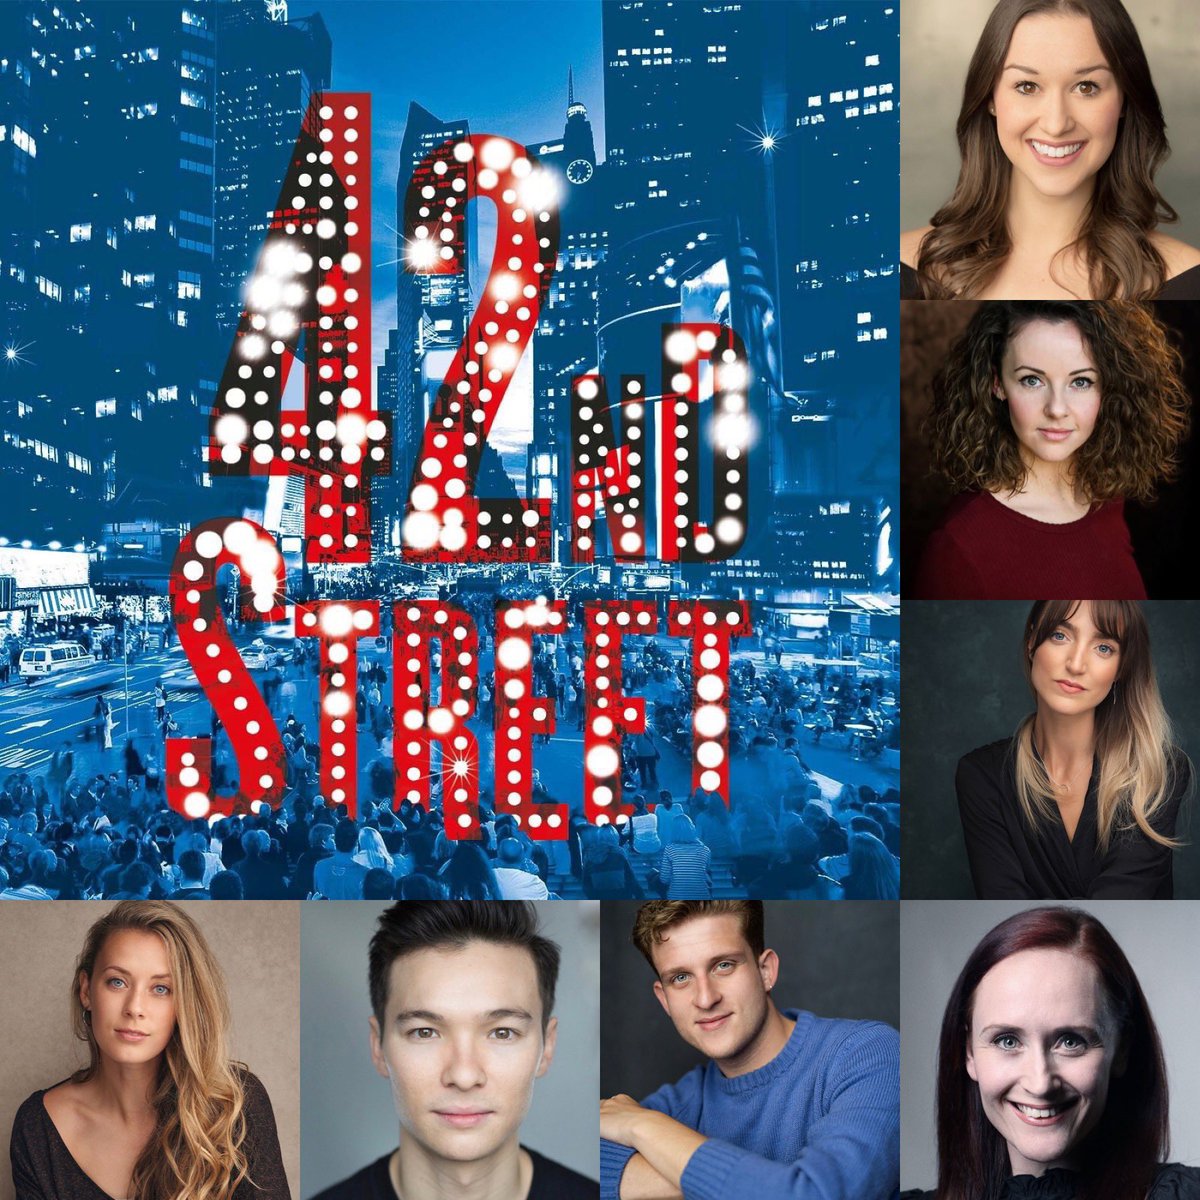 ‘42nd Street’ is heading to @theatrechatelet this Christmas and it features 7 Laineys! 🤩👏🎄🇫🇷 Congratulations to @JessBuckby, @challennn, @DaisyBoyles , @JoGoodwinDance, @michaelinzeenho , @George_Lyons__ and @Libby Watts! @StephenMear will be directing/choreographing.